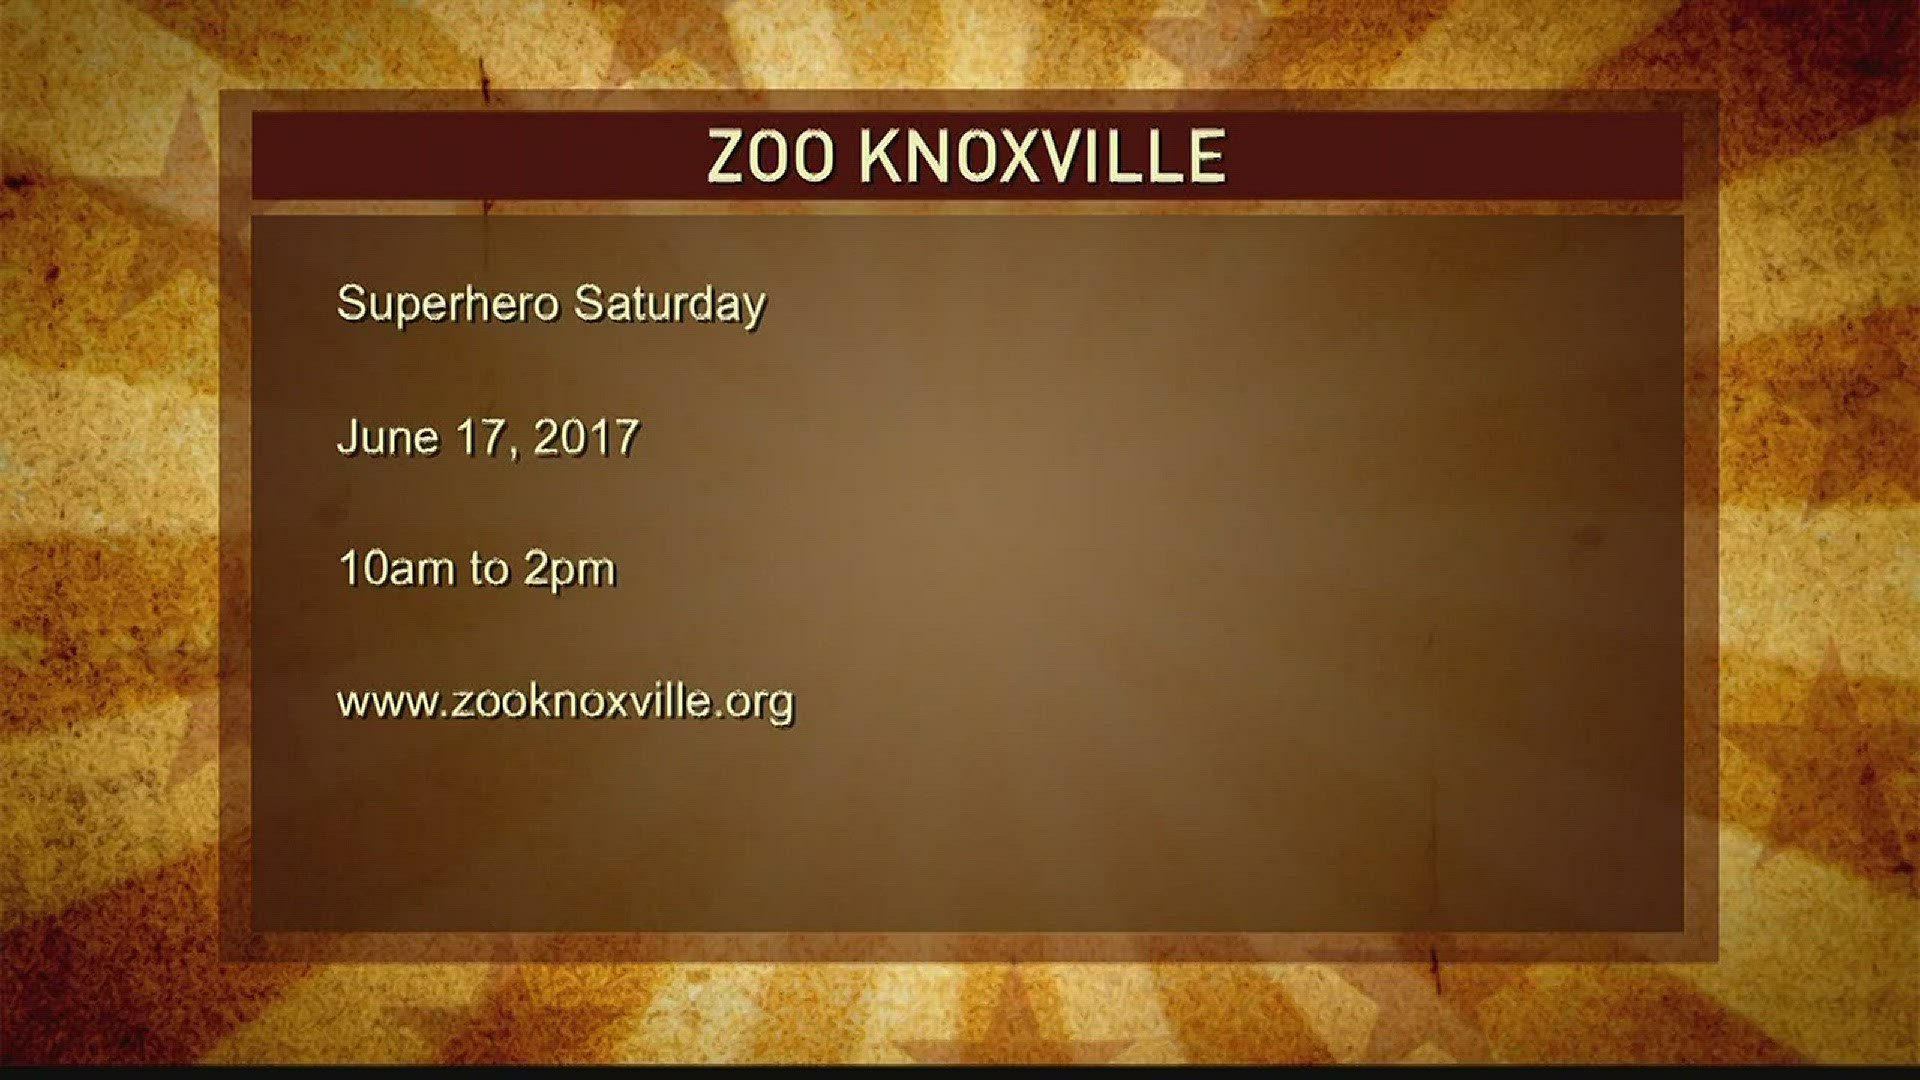 Marvel Comics favorites Spider-Man and Captain America are coming to Zoo Knoxville for a special appearance at Superhero Saturday this Saturday, June 17, from 10:00 a.m. until 2:00 p.m.  zooknoxville.orgJune 14, 2017, 4pm